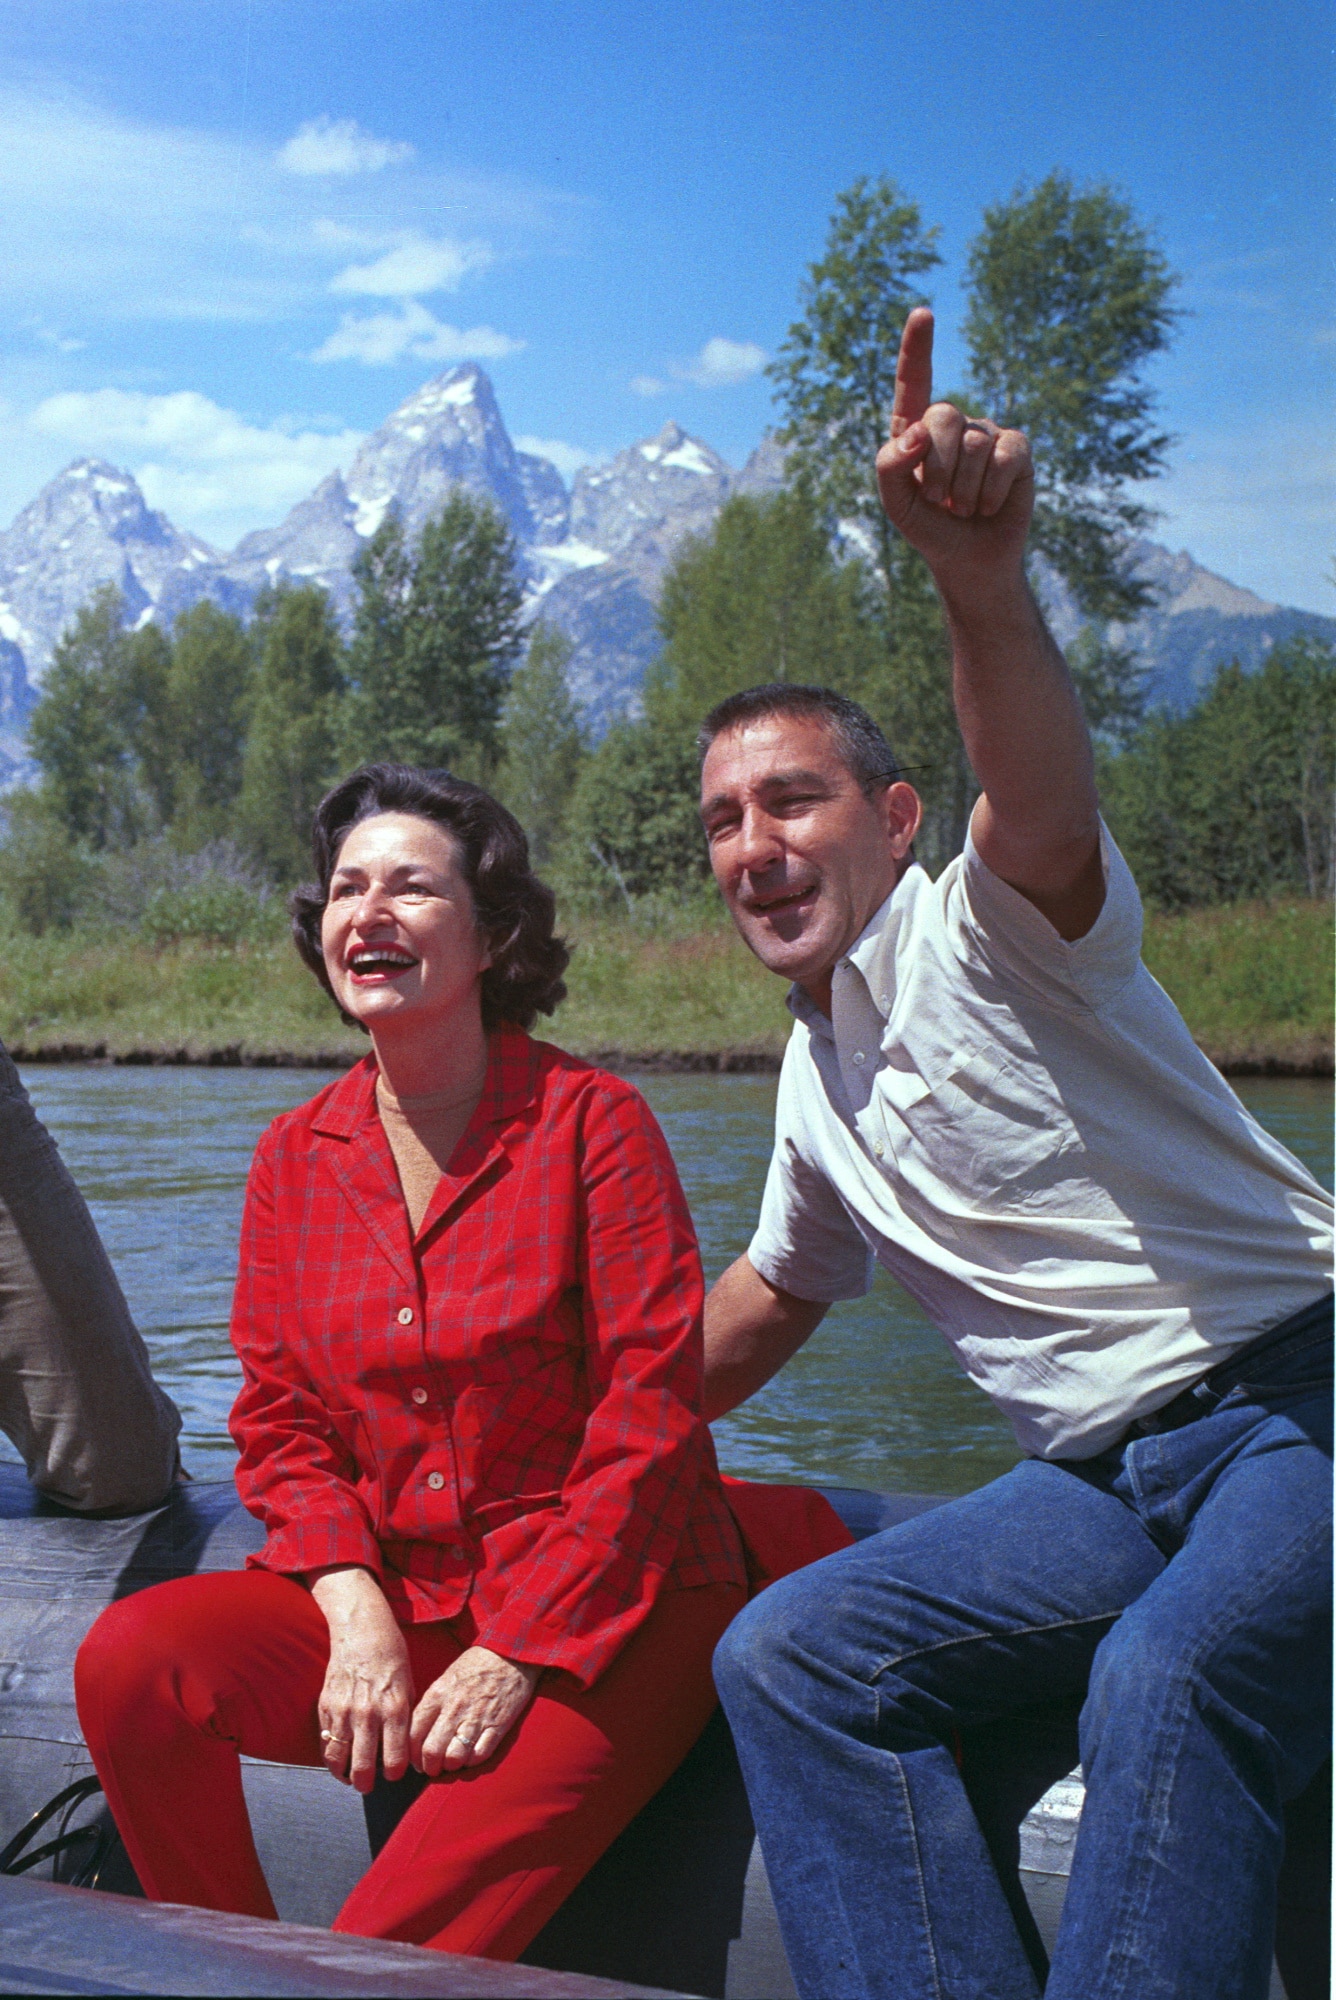 Lady Bird Johnson would prove to be the most progressive first lady in American history when it came to conservation and the environment